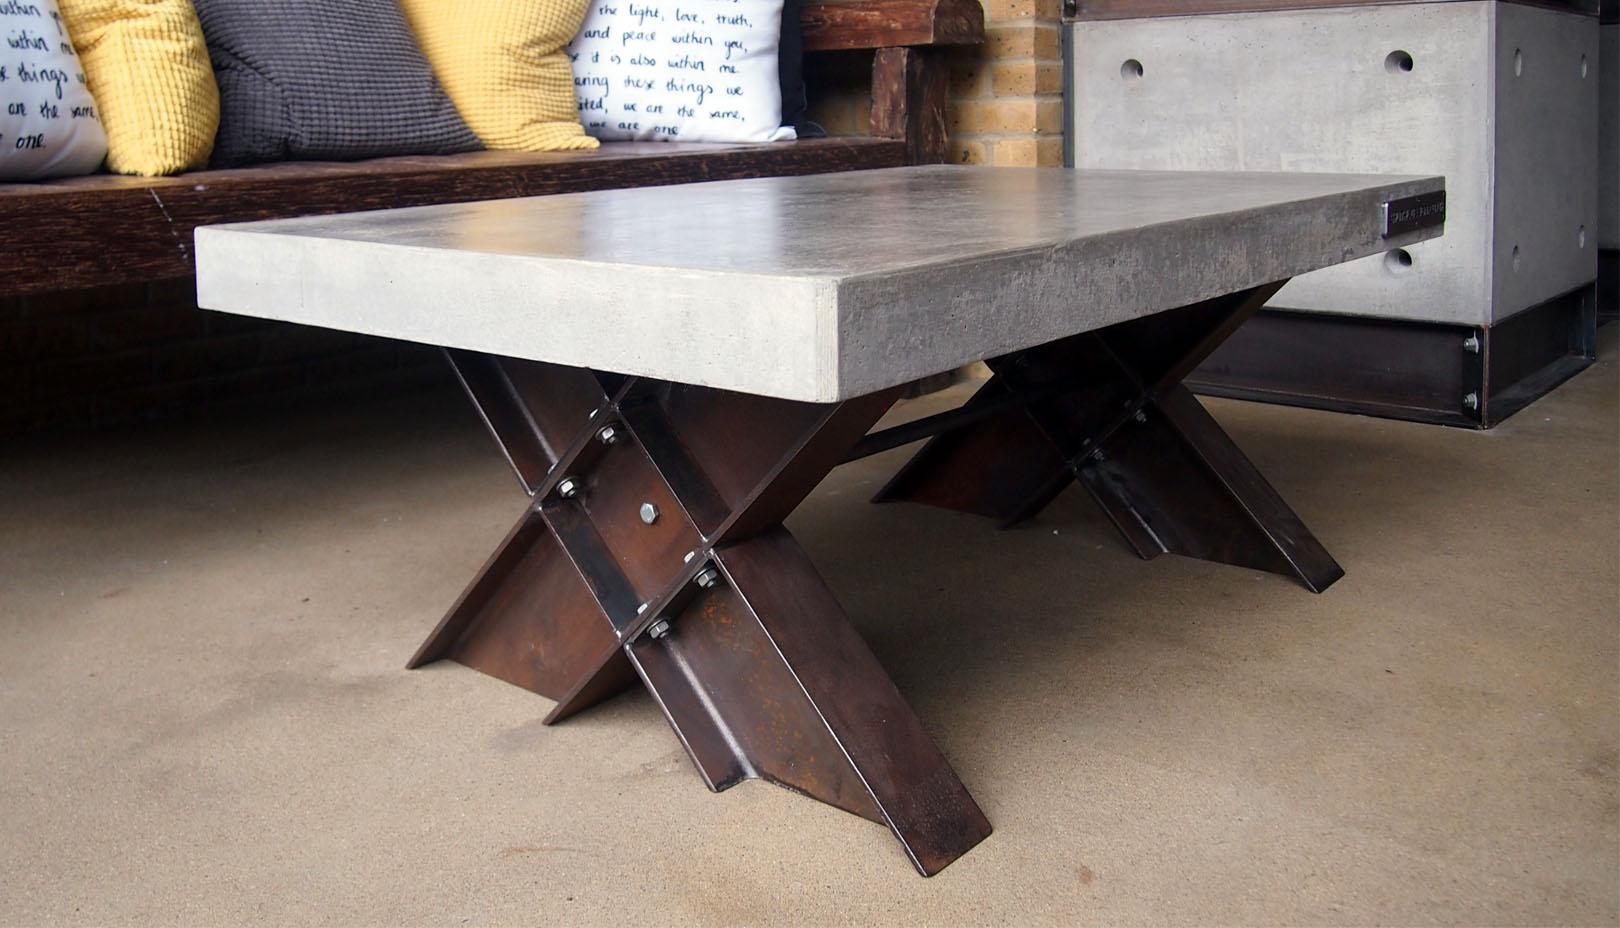 Polished Concrete Coffee Table | By Brutal Design London